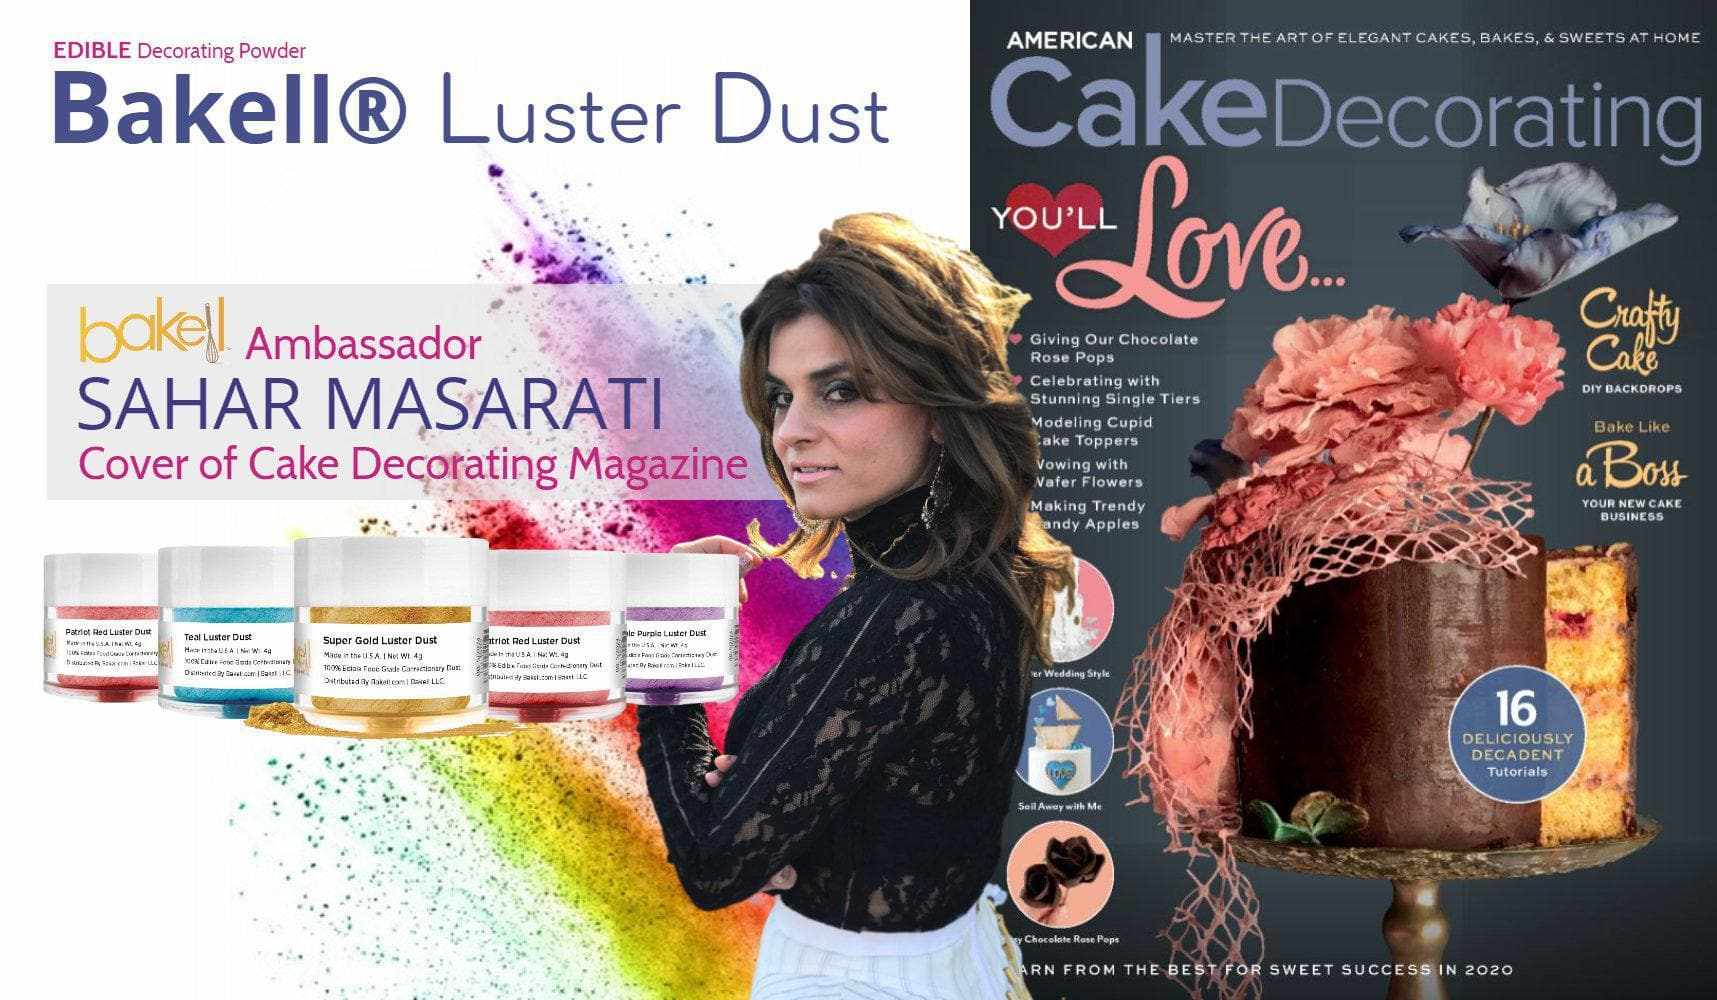 Turquoise Edible Luster Dust | FDA Approved Edible Paint | Bakell.com